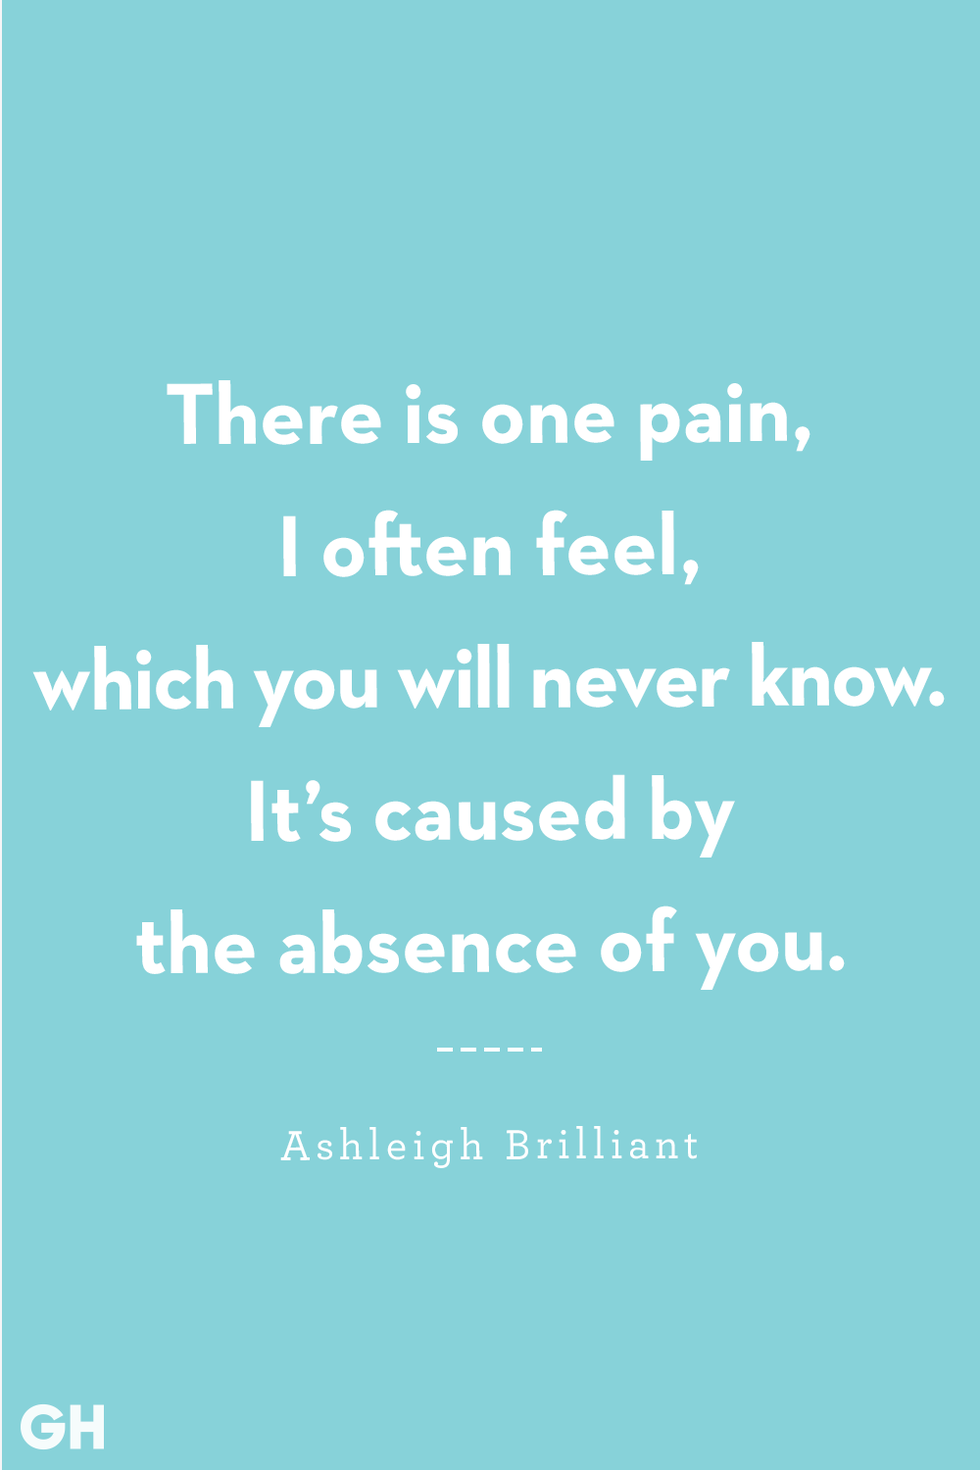 Ashleigh Brilliant Quote: “Life is the only game in which the